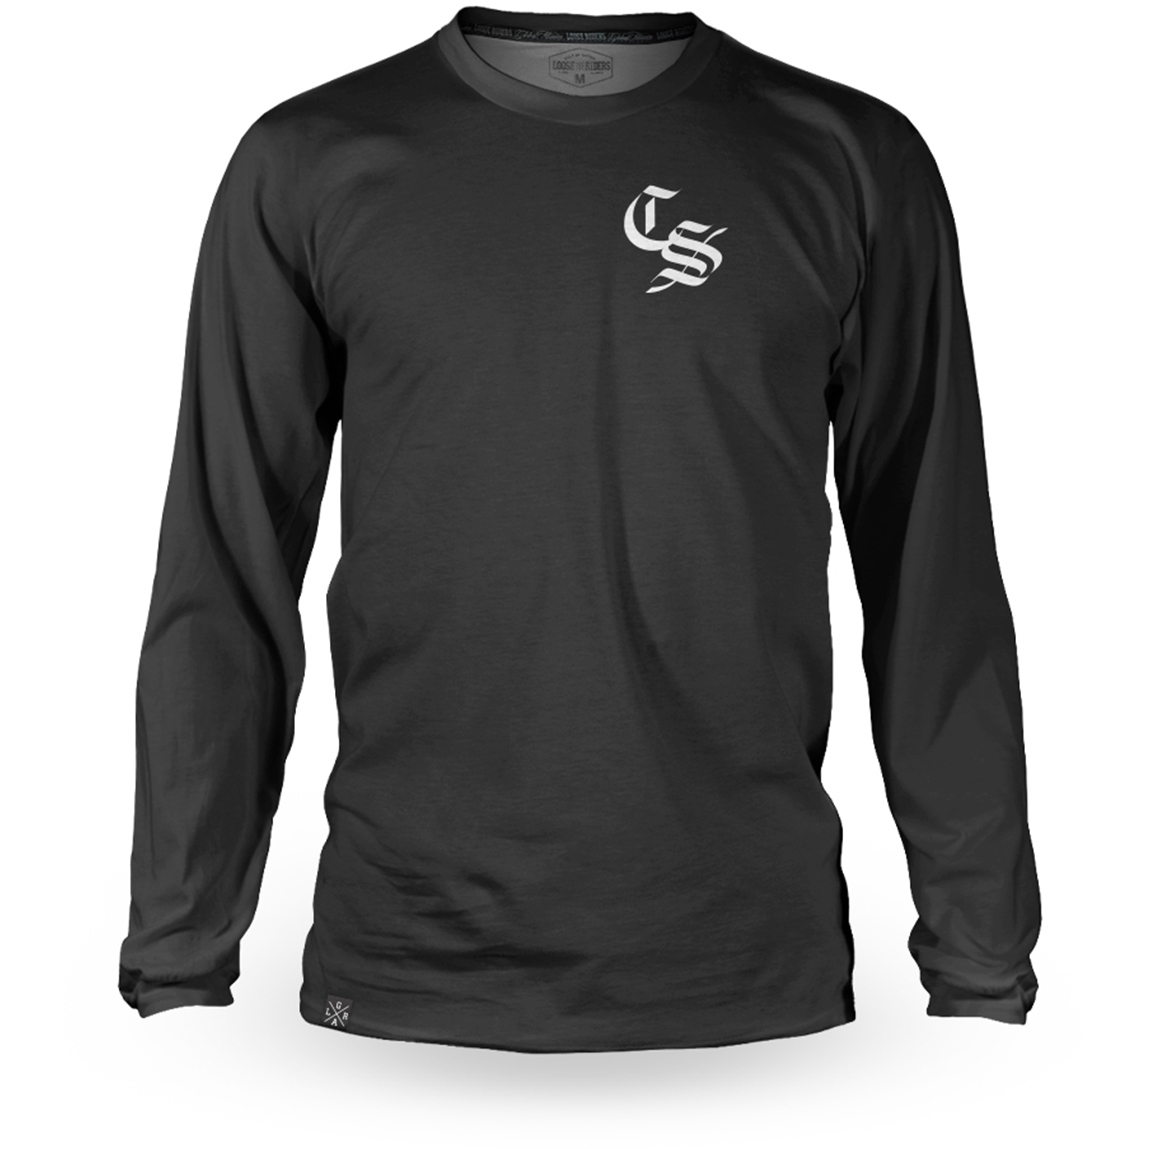 Image of Loose Riders C/S Technical Long Sleeve Jersey - Black